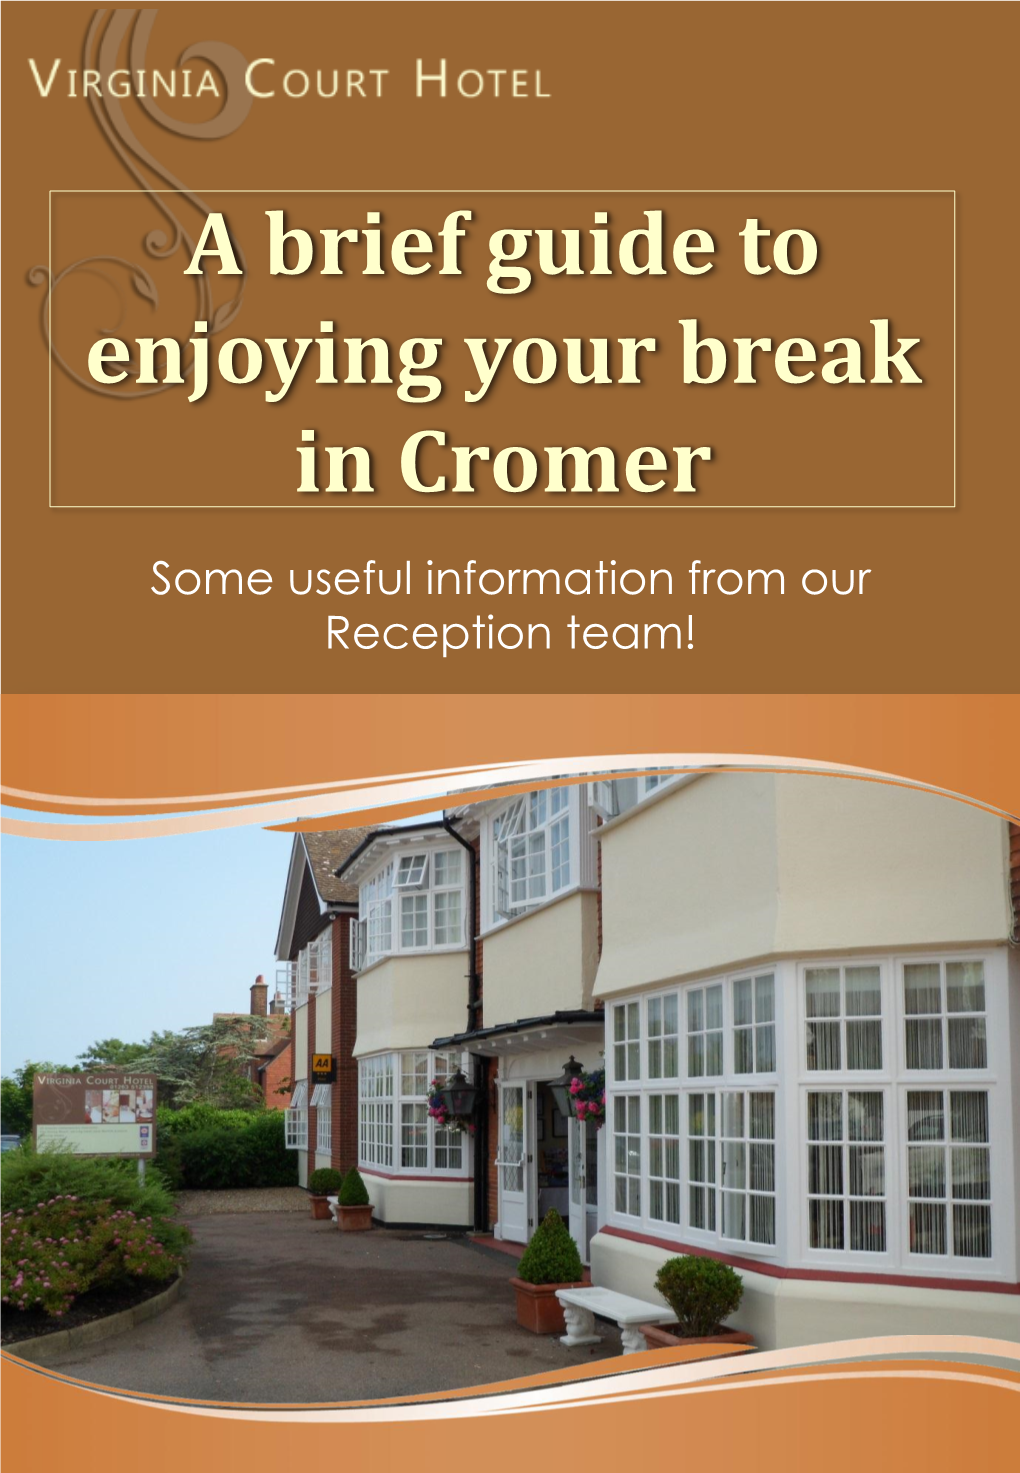 A Brief Guide to Enjoying Your Break in Cromer